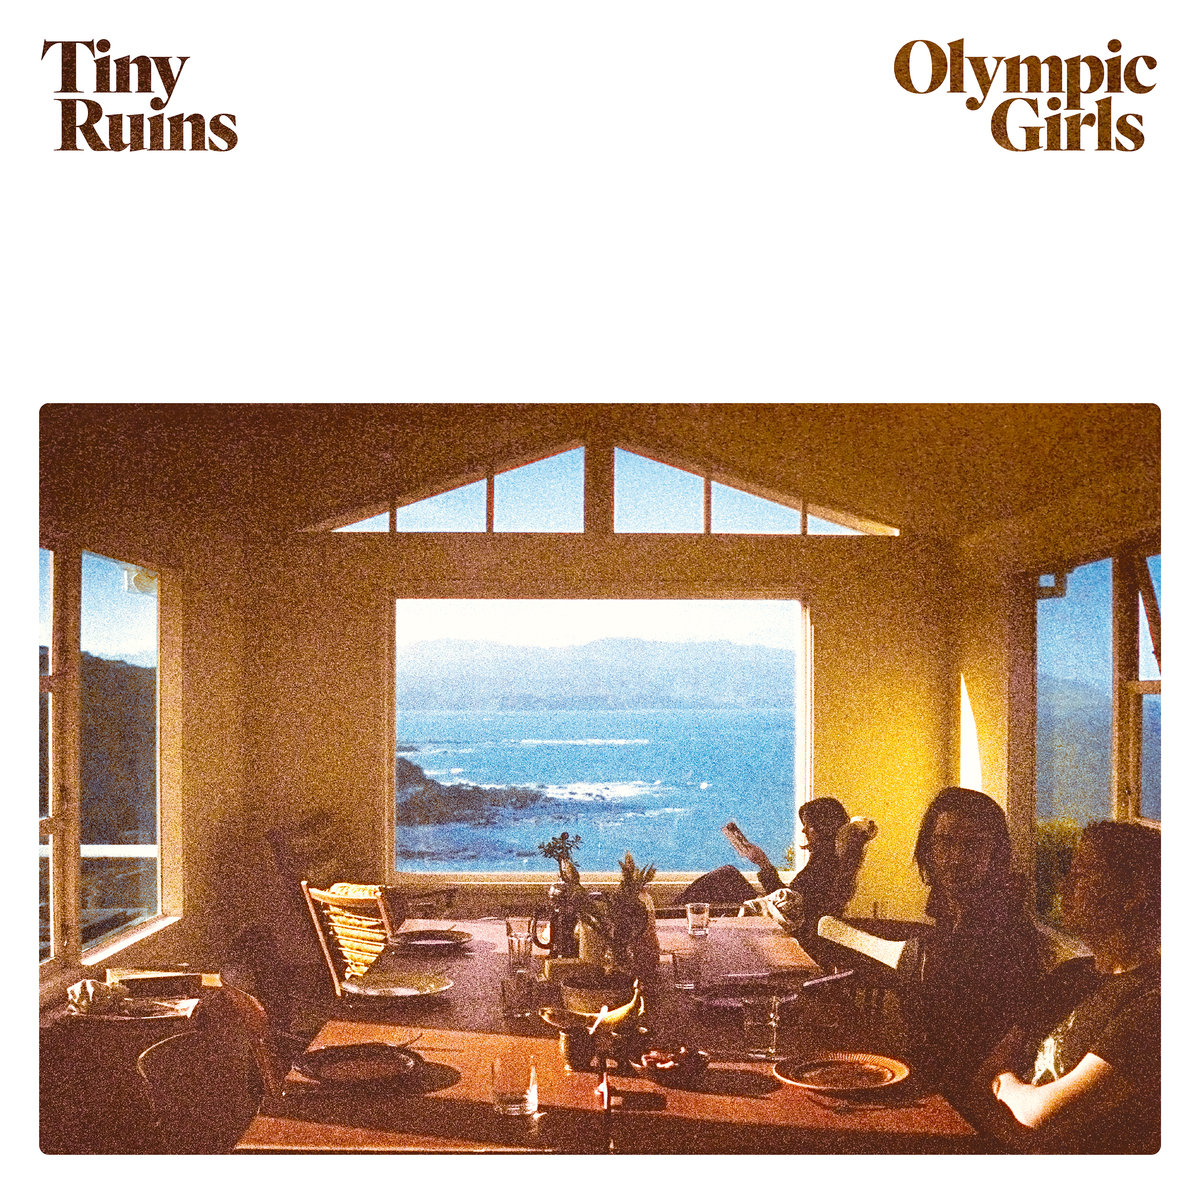 'Olympic Girls' by Tiny Ruins album review by Matthew Wardell for Northern Transmissions